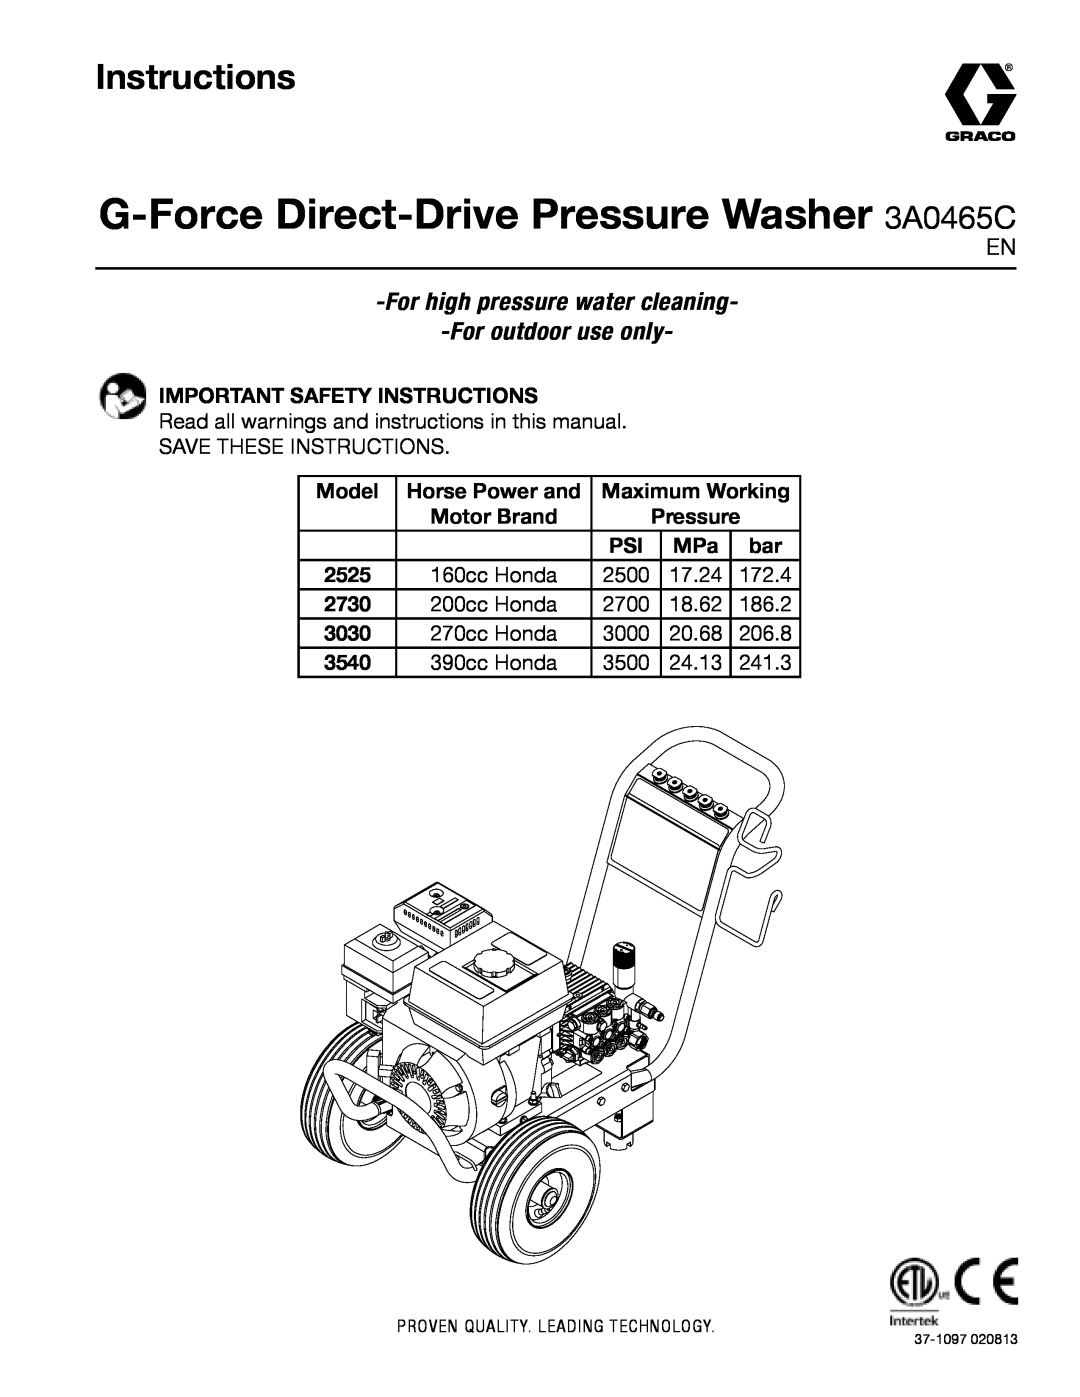 Graco 3A0465C important safety instructions Important Safety Instructions, Model, Horse Power and, Maximum Working 